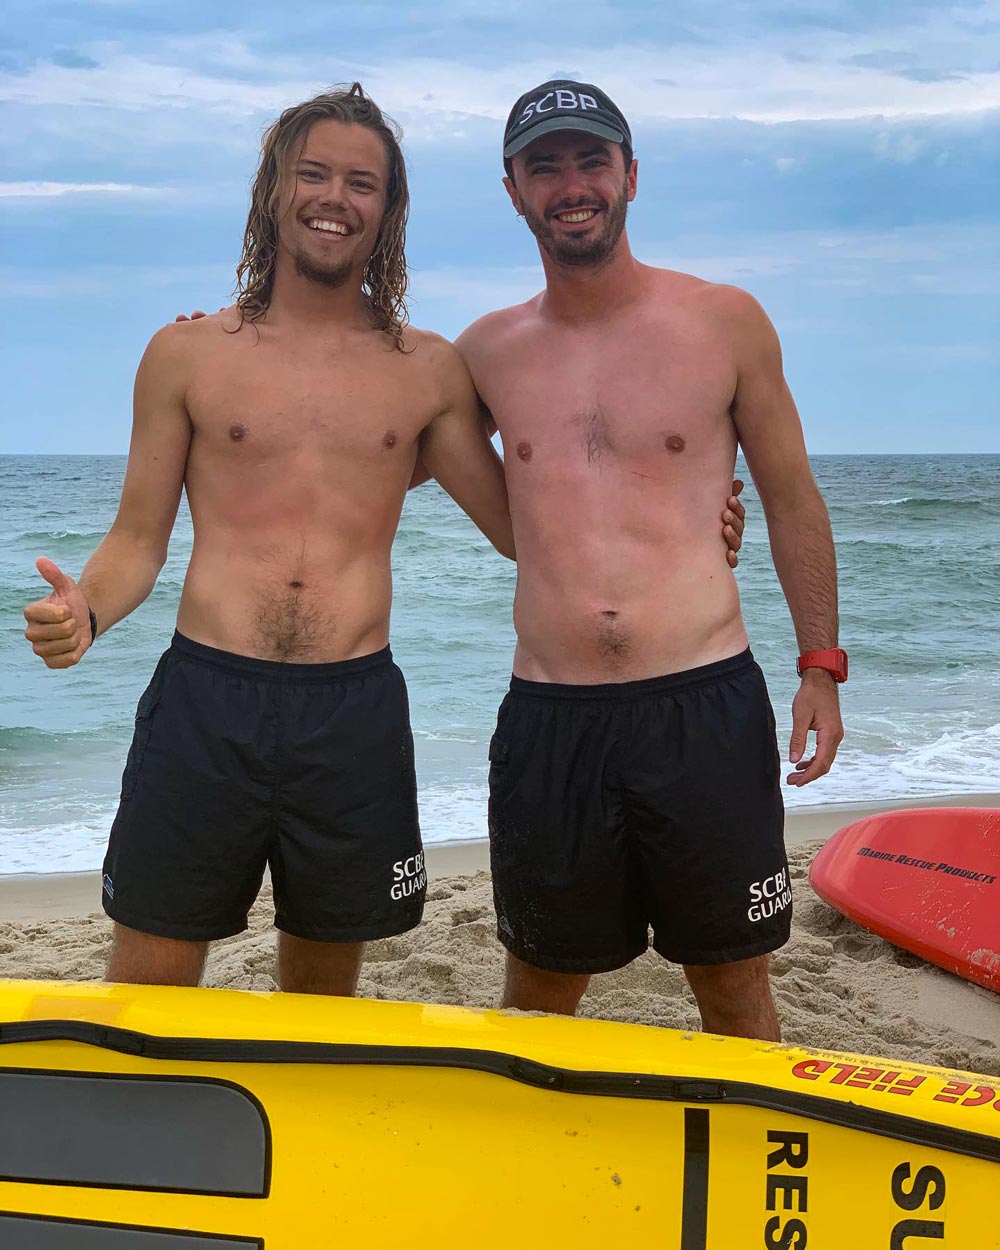 Osborne, right, and fellow lifeguard Scott Meggitt, left stand together on the beach pose for a picture